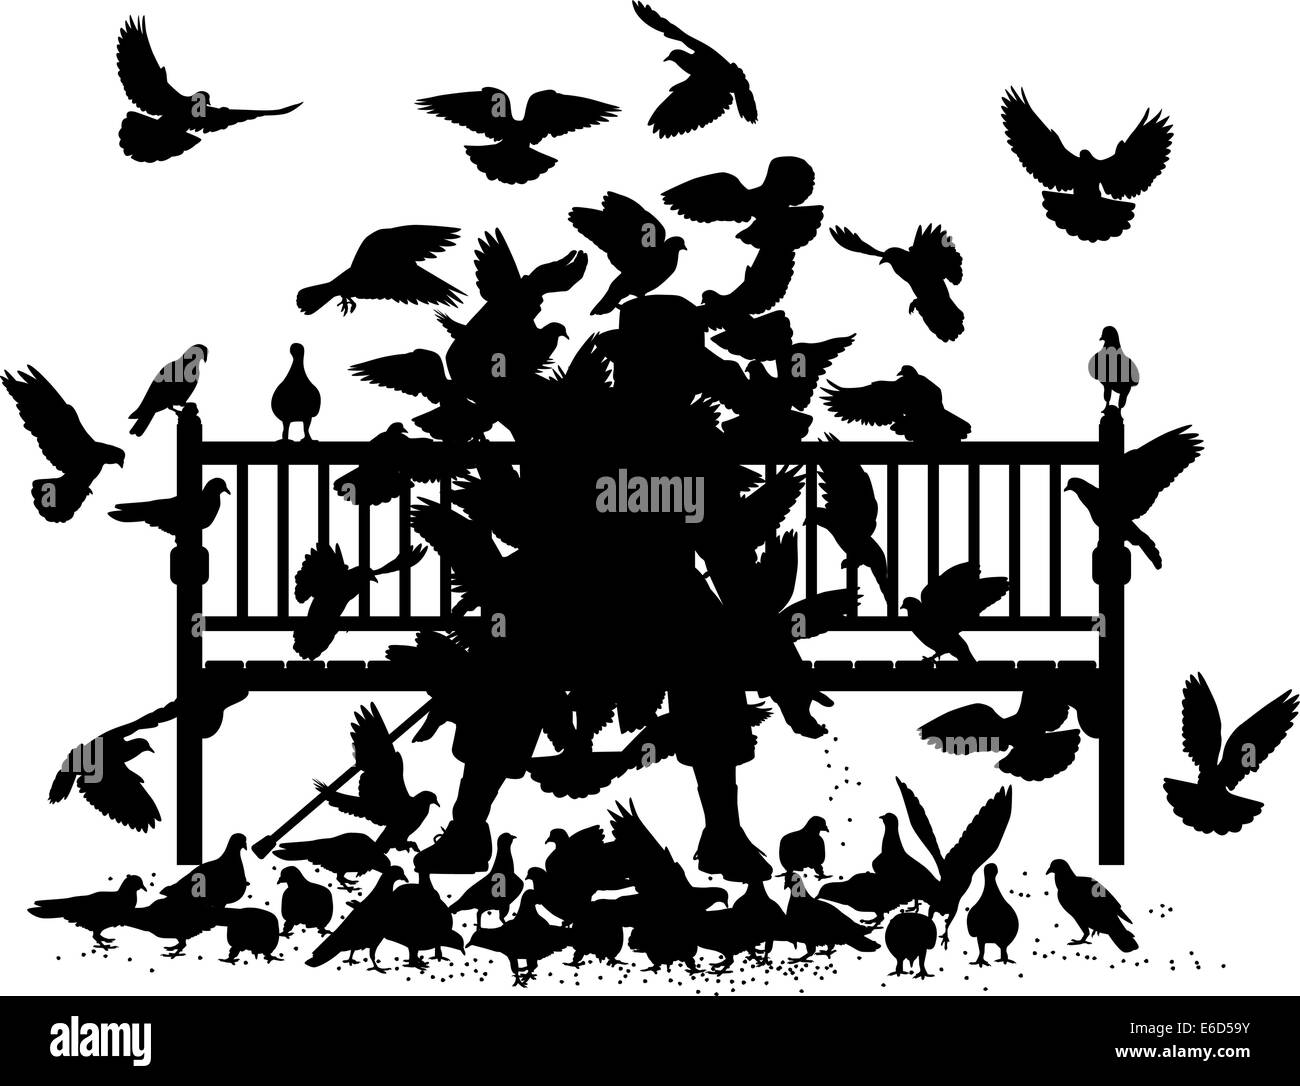 Editable vector silhouettes of a man on a bench smothered by pigeons with all birds as separate objects Stock Vector